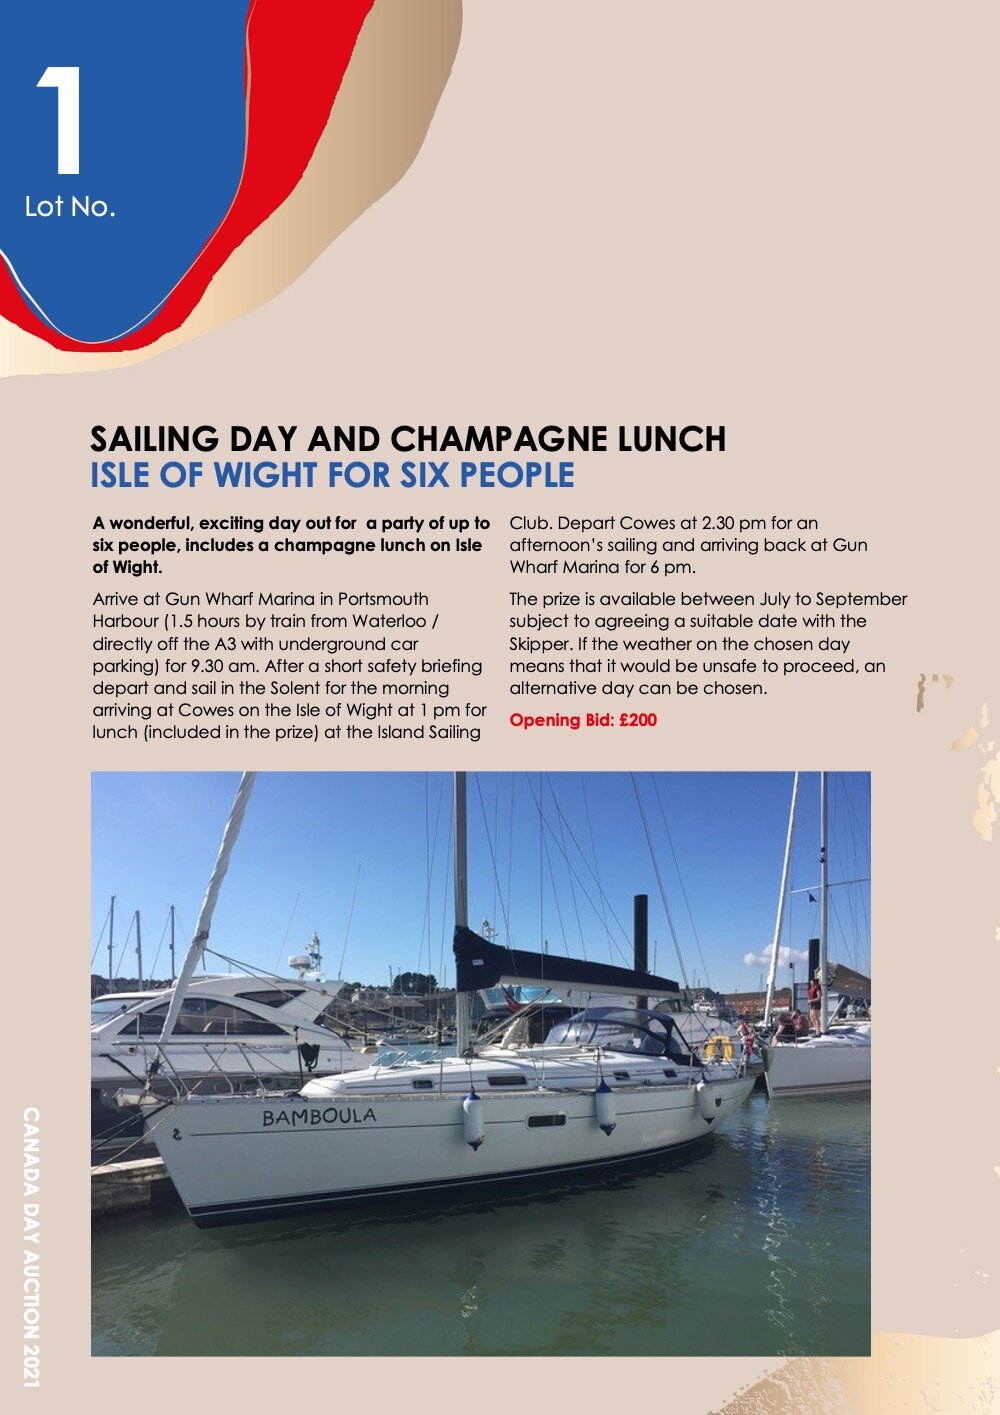   SAILING DAY AND CHAMPAGNE LUNCH     ISLE OF WIGHT FOR SIX PEOPLE     A wonderful, exciting day out for a party of up to six people, includes a champagne lunch on Isle of Wight.    Arrive at Gun Wharf Marina in Portsmouth Harbour (1.5 hours by train